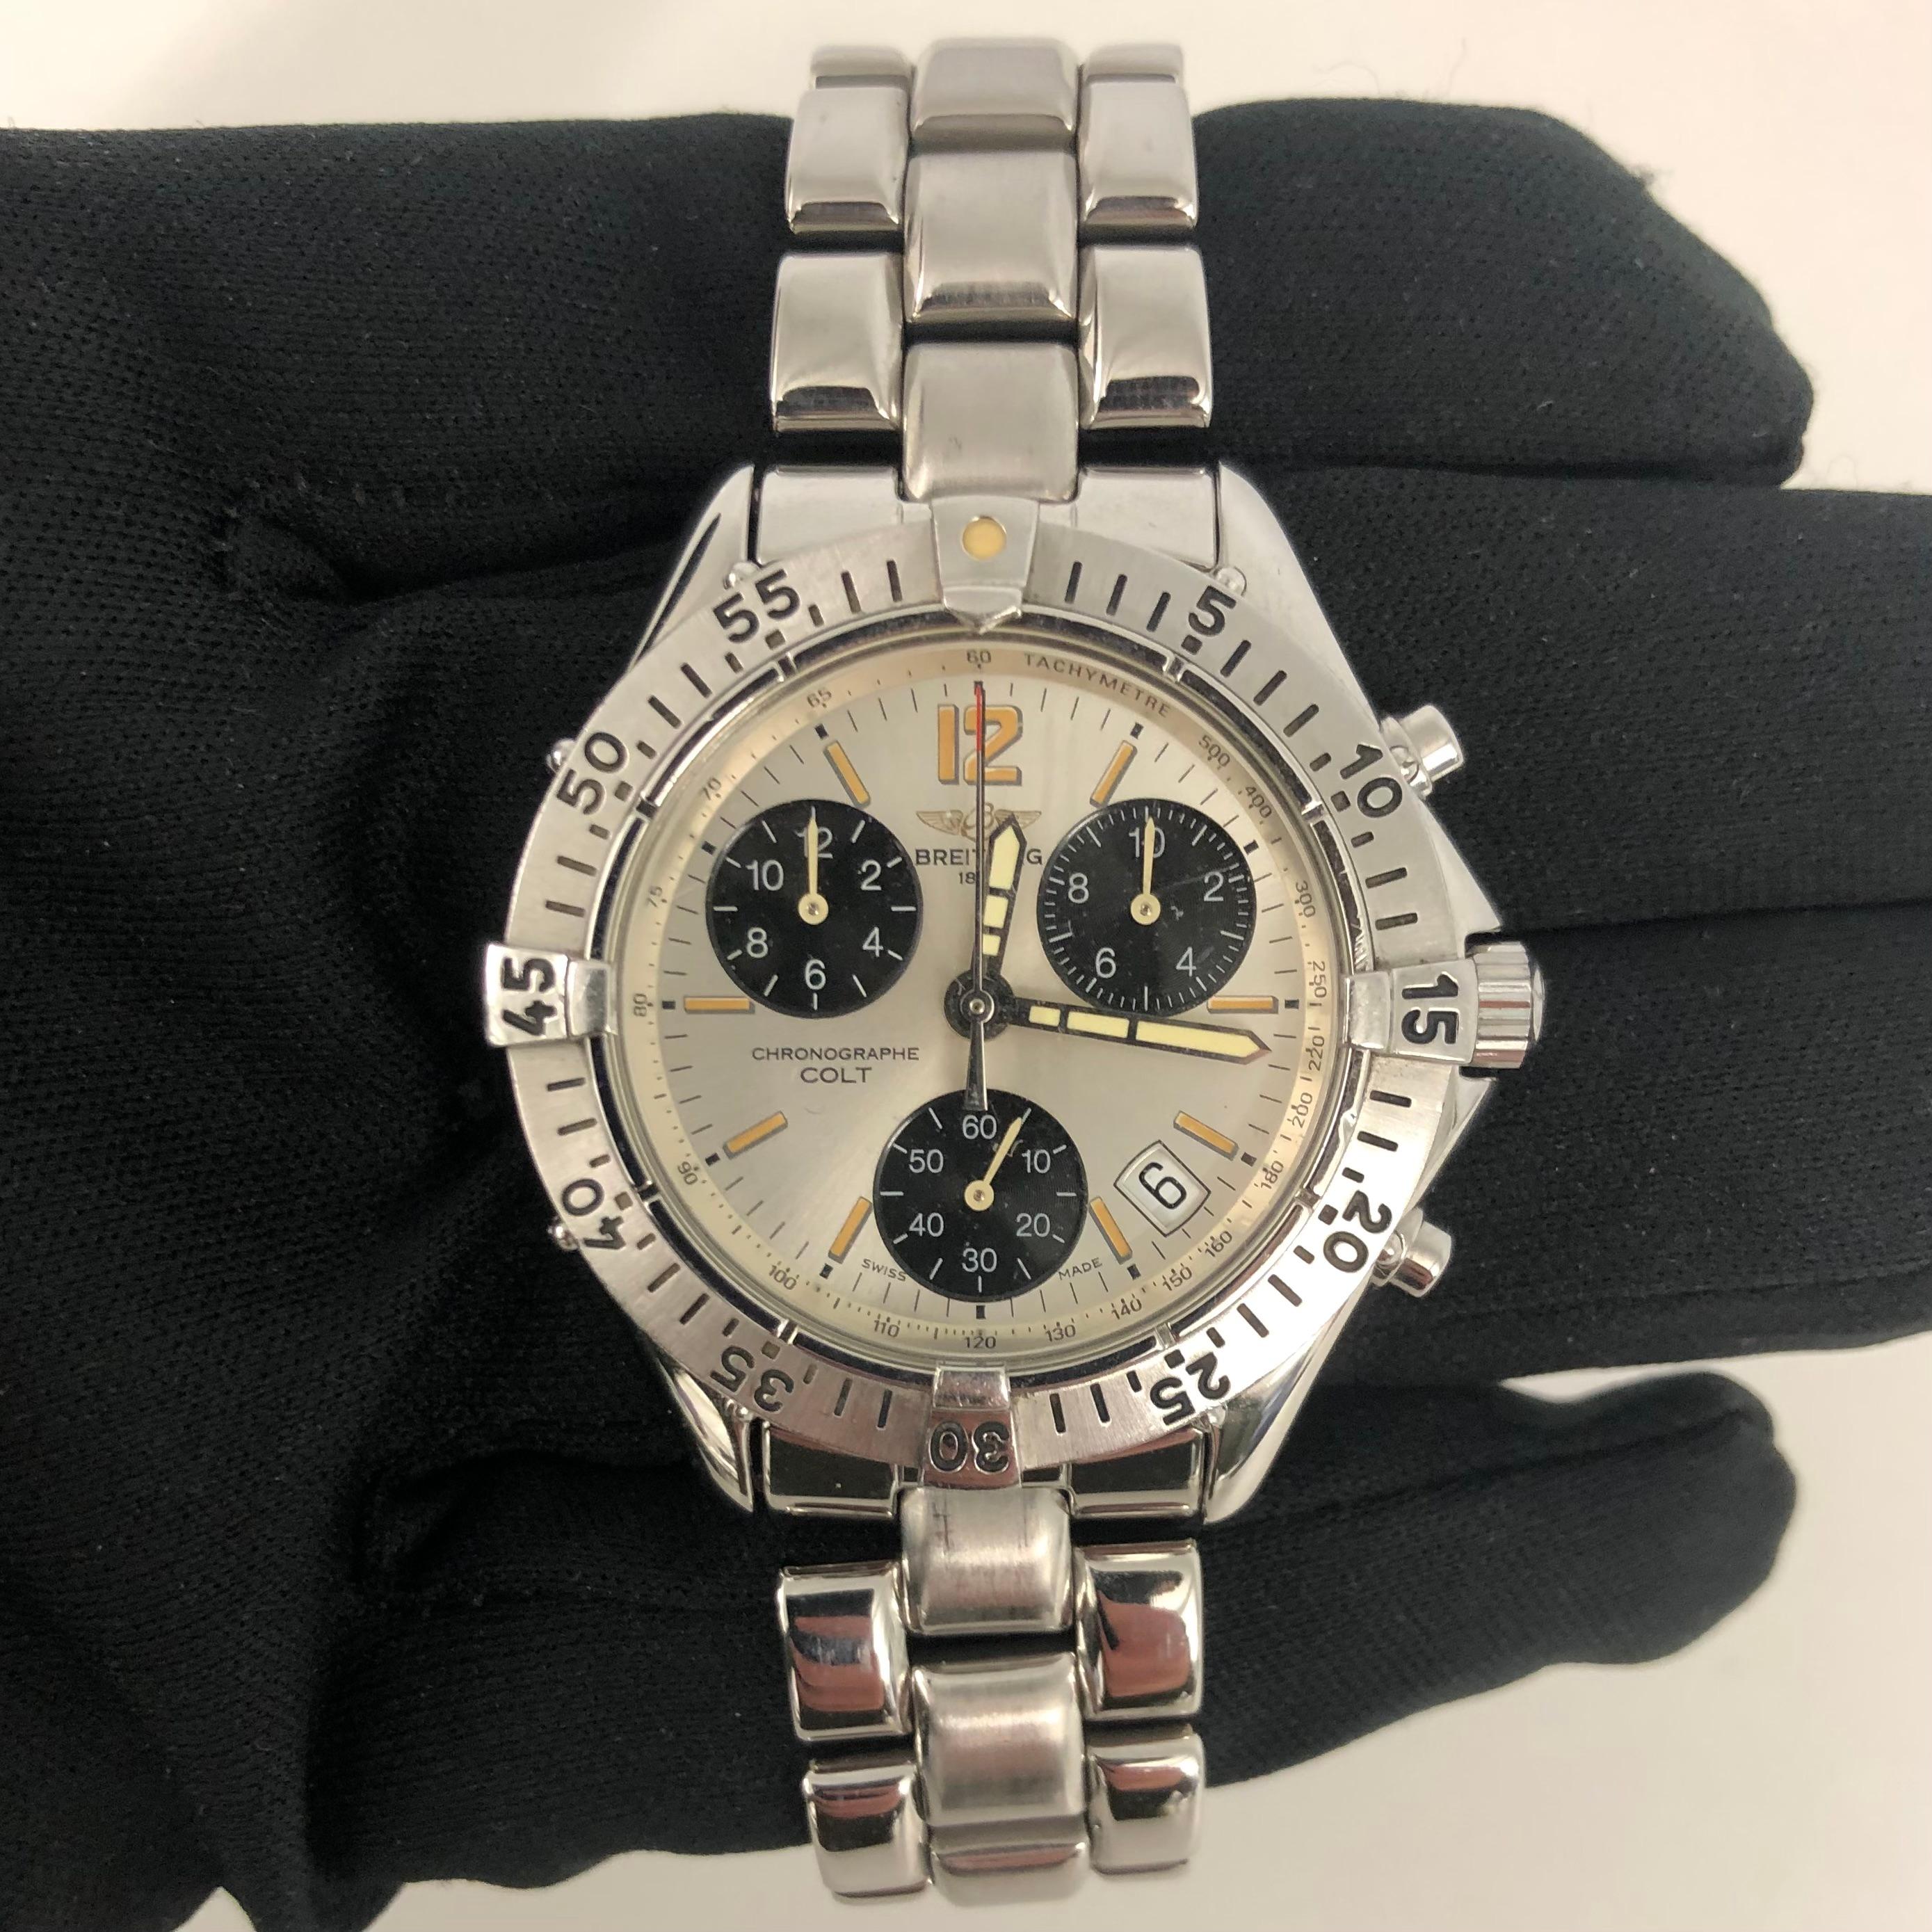 Men’s Breitling Colt Chronograph A53035 Stainless Steel Watch mm For Sale 1